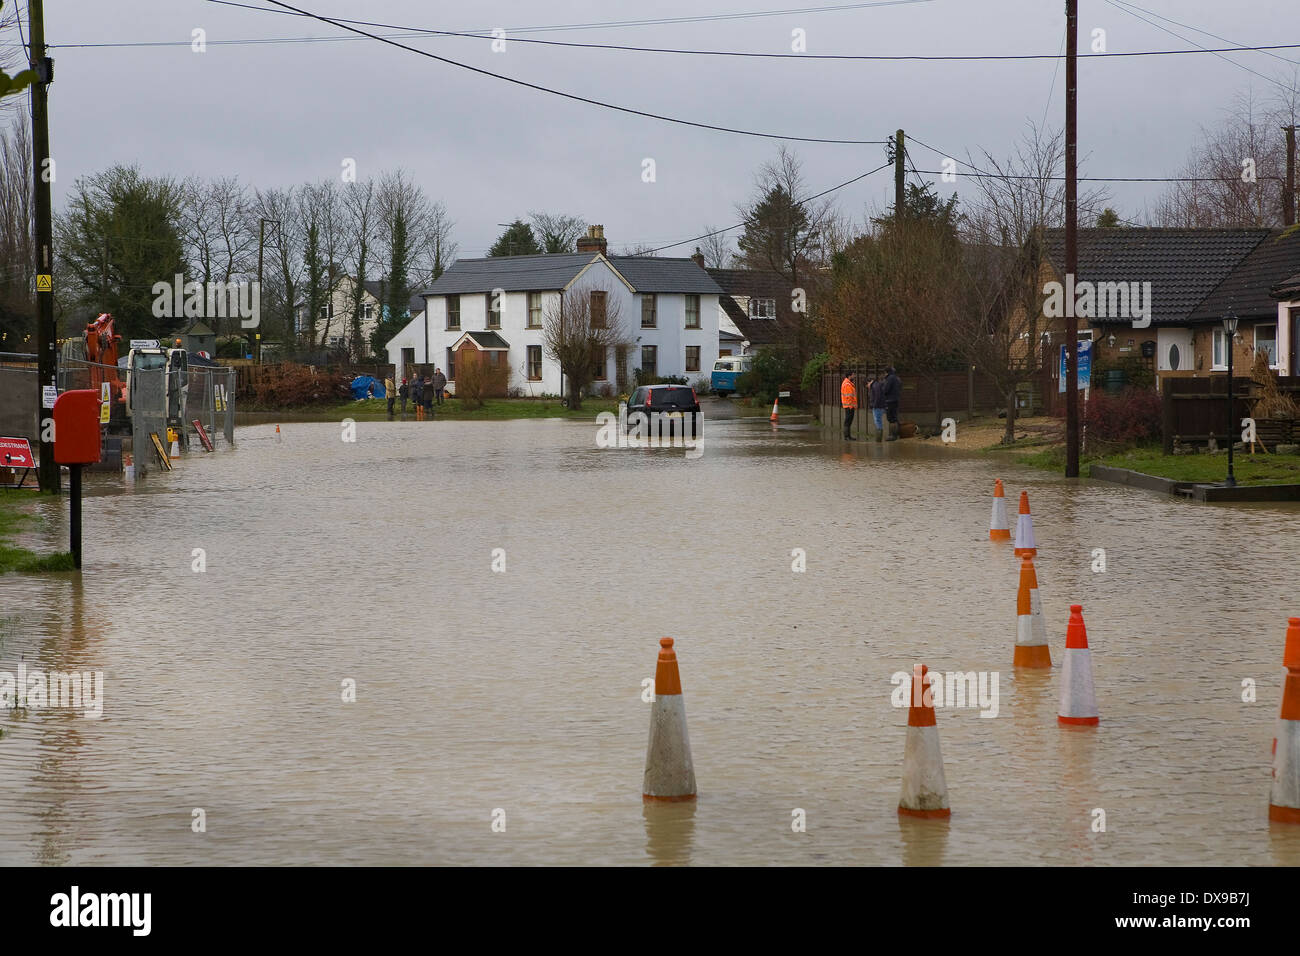 Flooded village of Steeple Bumpstead in Essex today after heavy overnight rain Pic George Impey Stock Photo